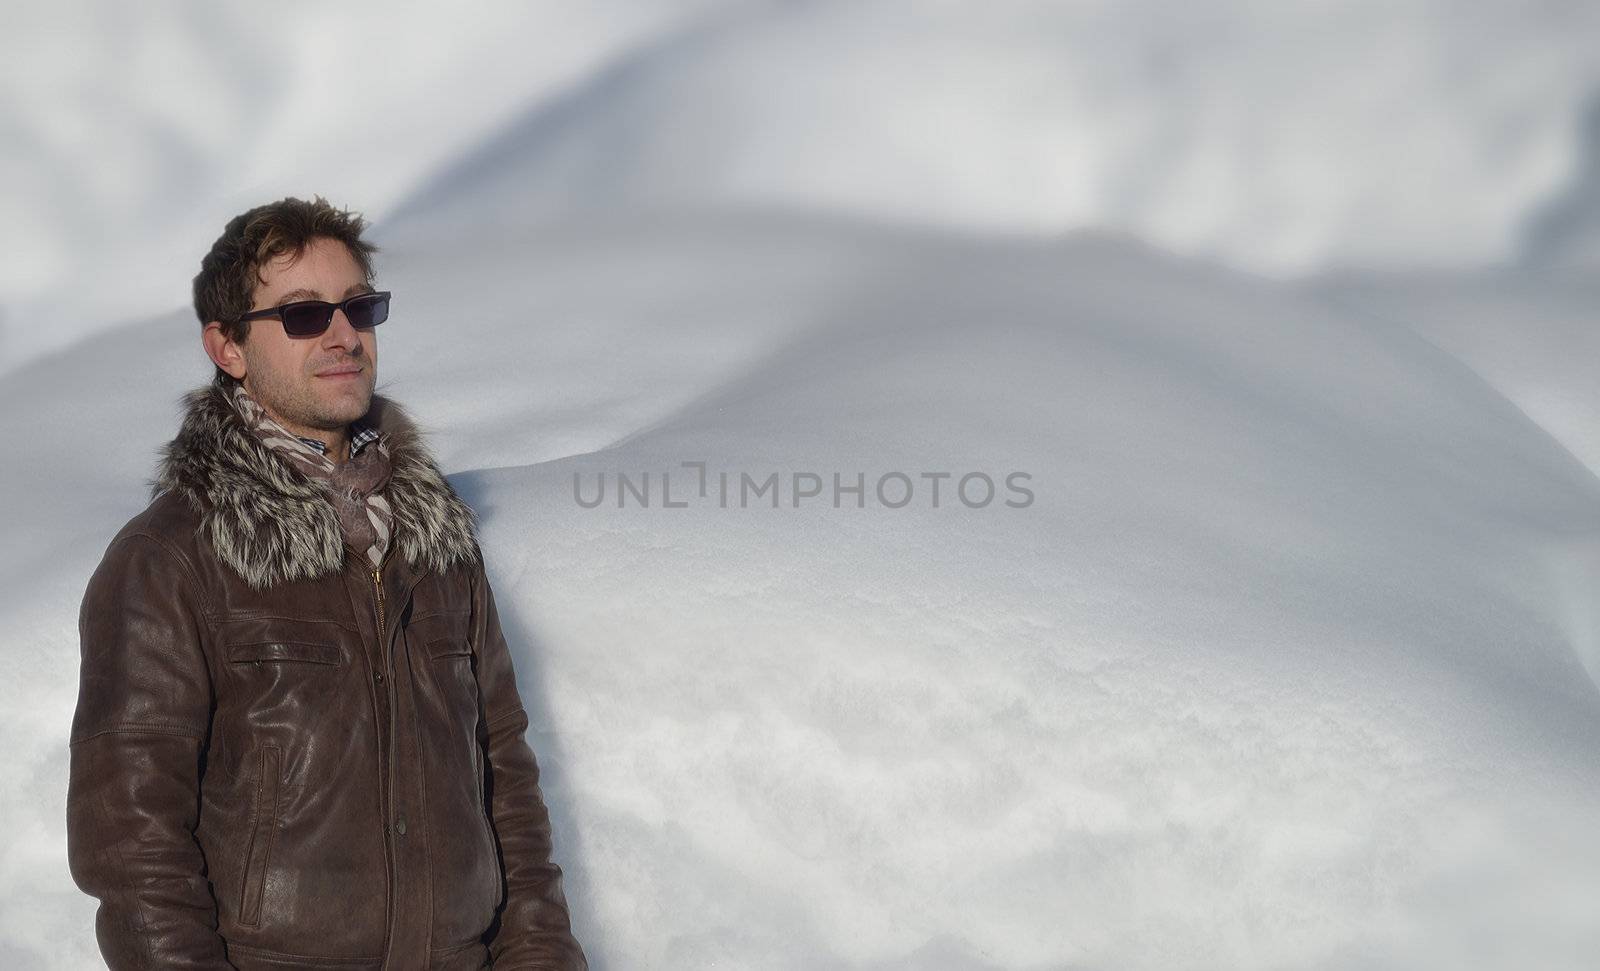 Good looking young man in front of snow. Copyspace, large space for text